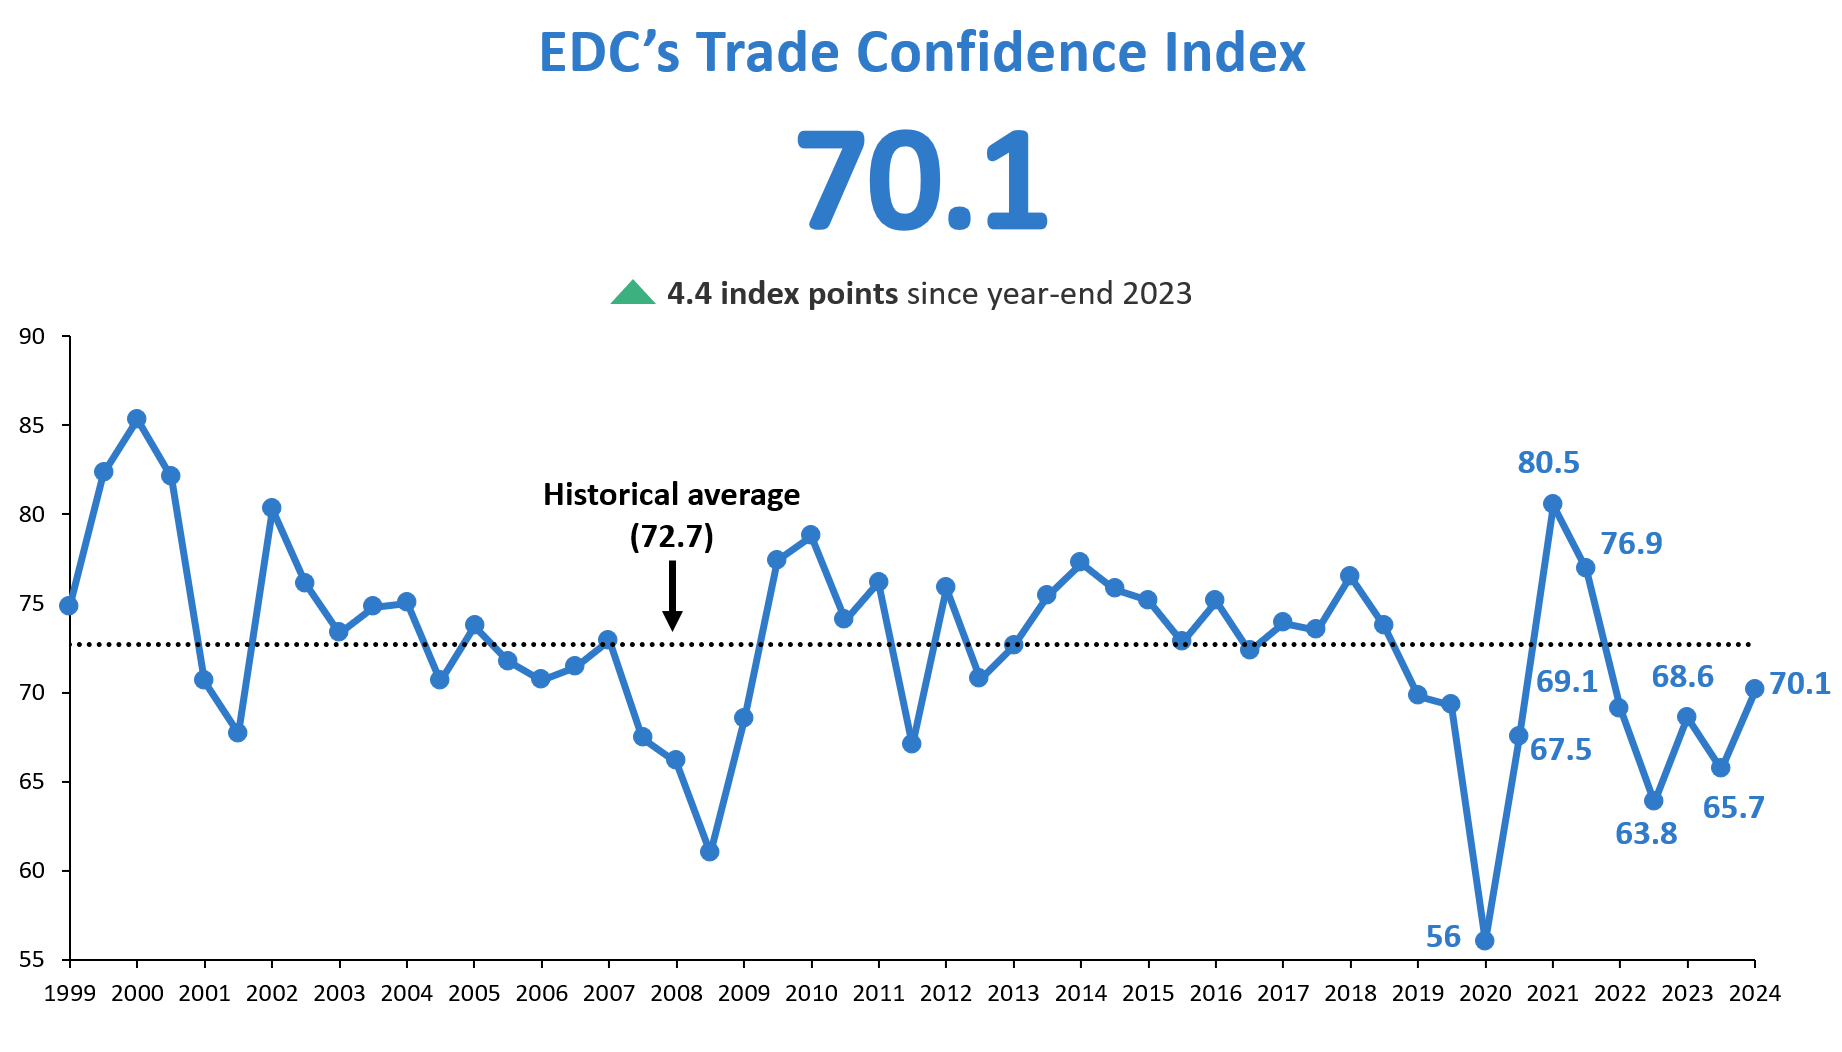 Trade confidence jumps to 70.1